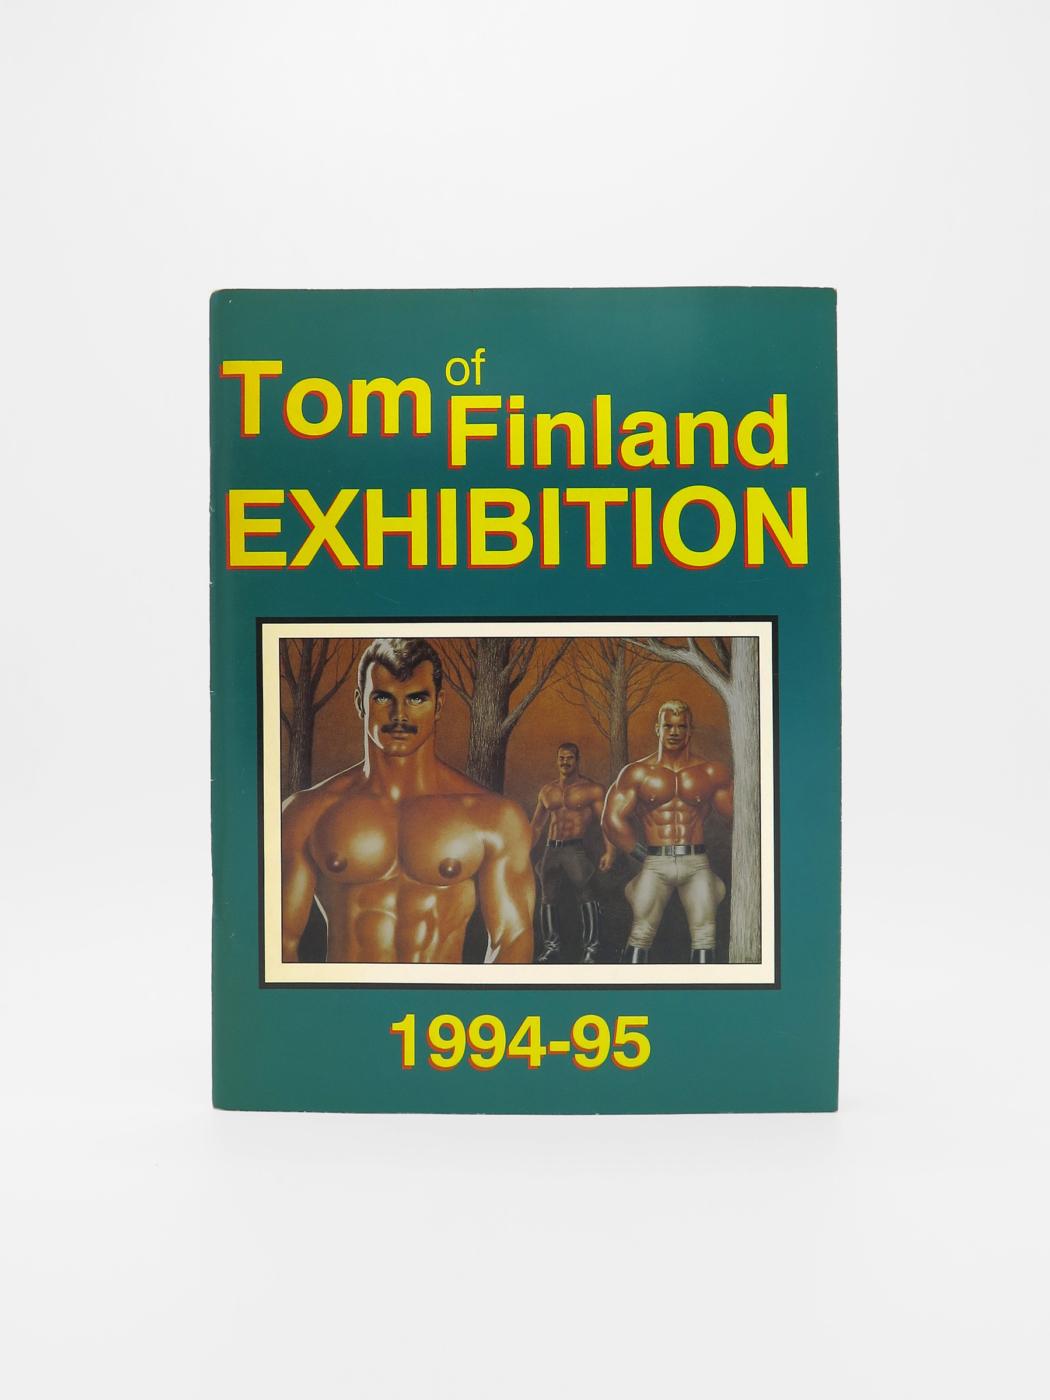 Tom of Finland, Exhibition 1994-95